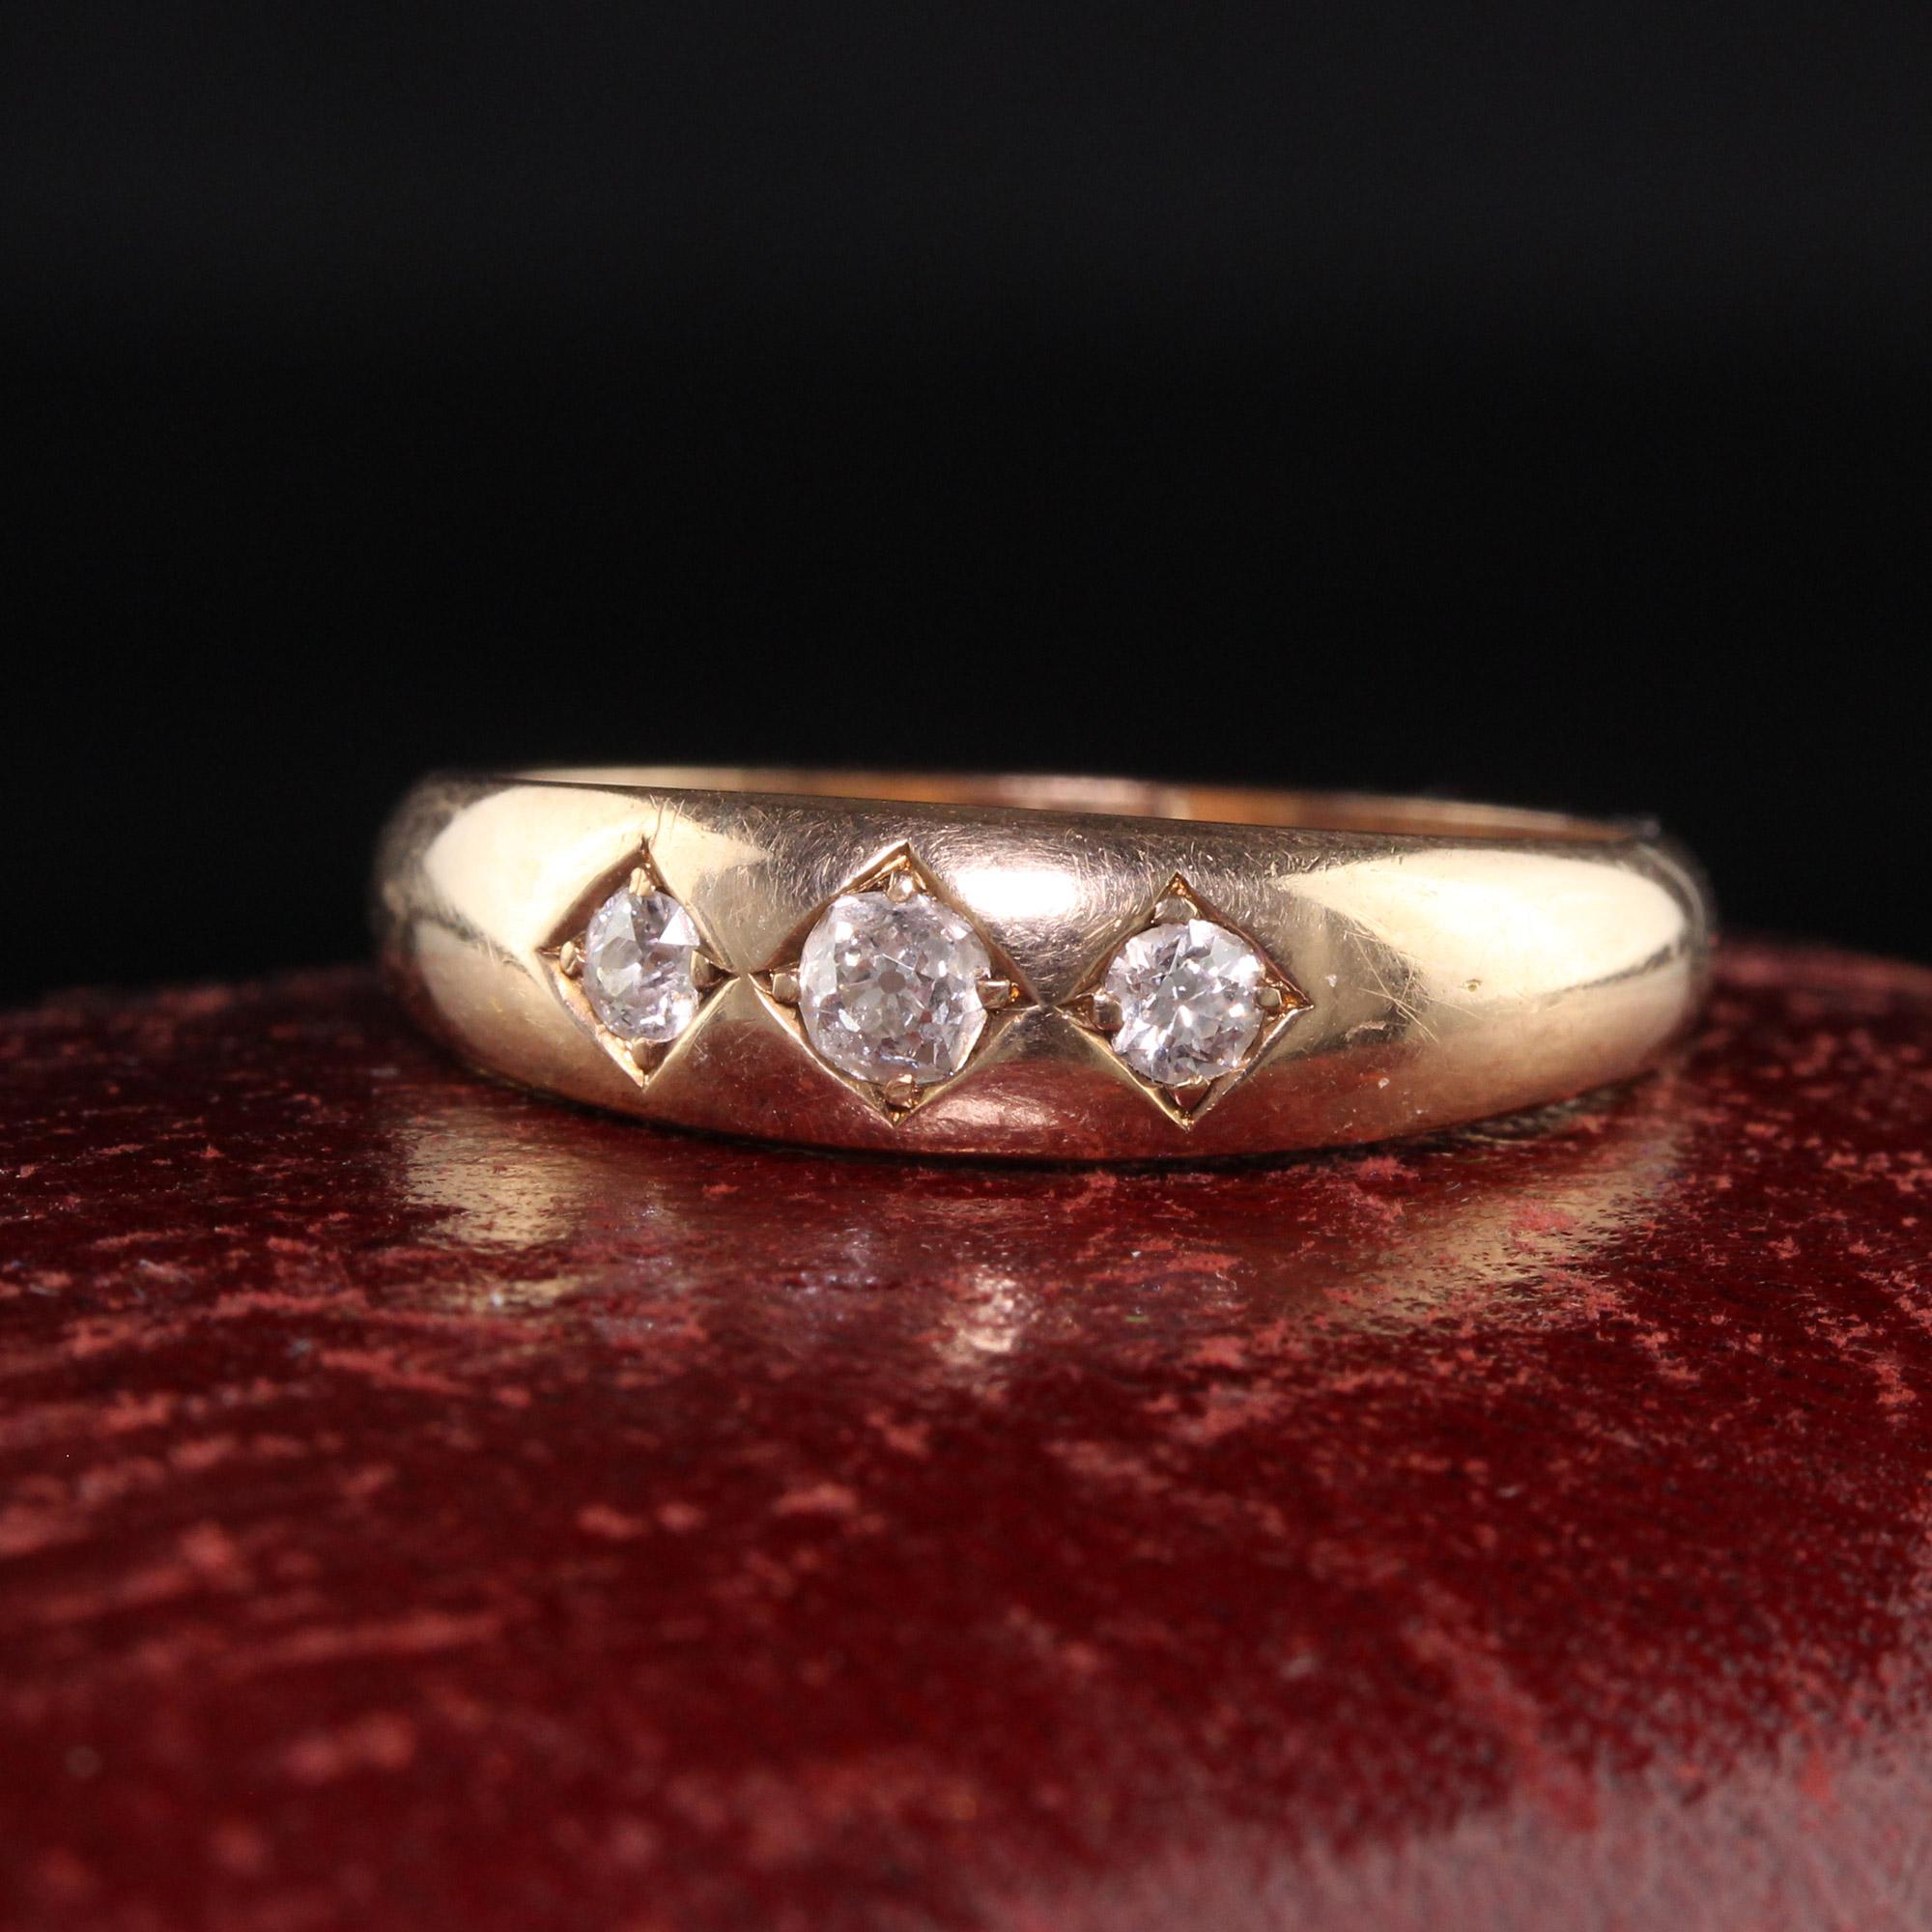 Beautiful Antique Victorian 14K Yellow Gold Old Mine Cut Diamond Three Stone Ring. This beautiful ring is crafted in 14k yellow gold. The ring has three old mine cut diamonds in the center and is in great condition.

Item #R1346

Metal: 14K Yellow